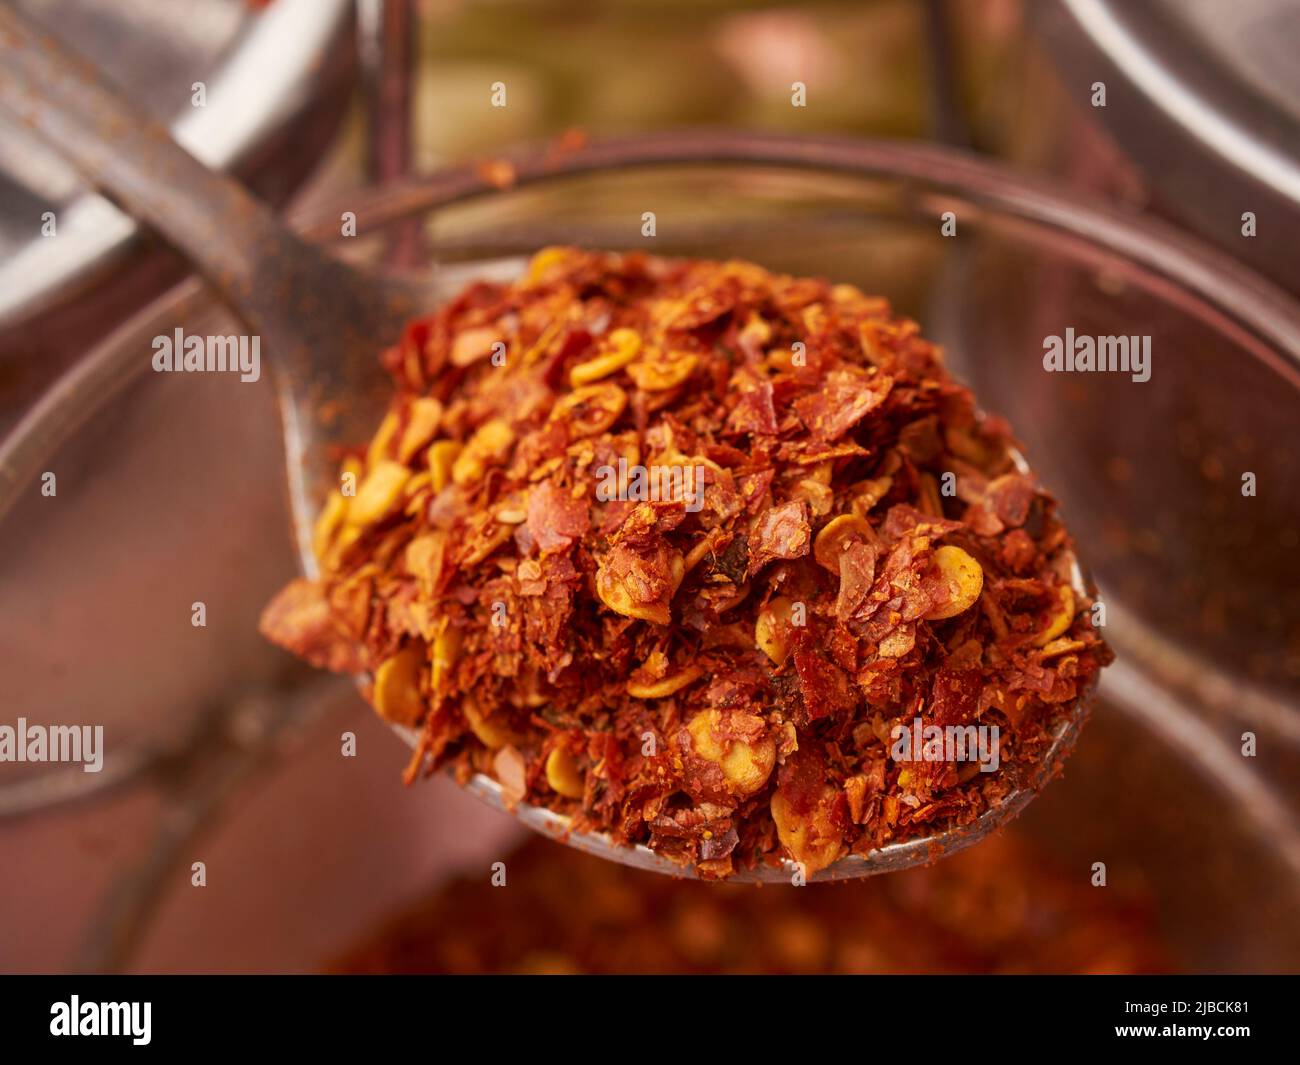 A spoonful of hot chili flakes, Little Thailand, Queens, New York City, USA Stock Photo